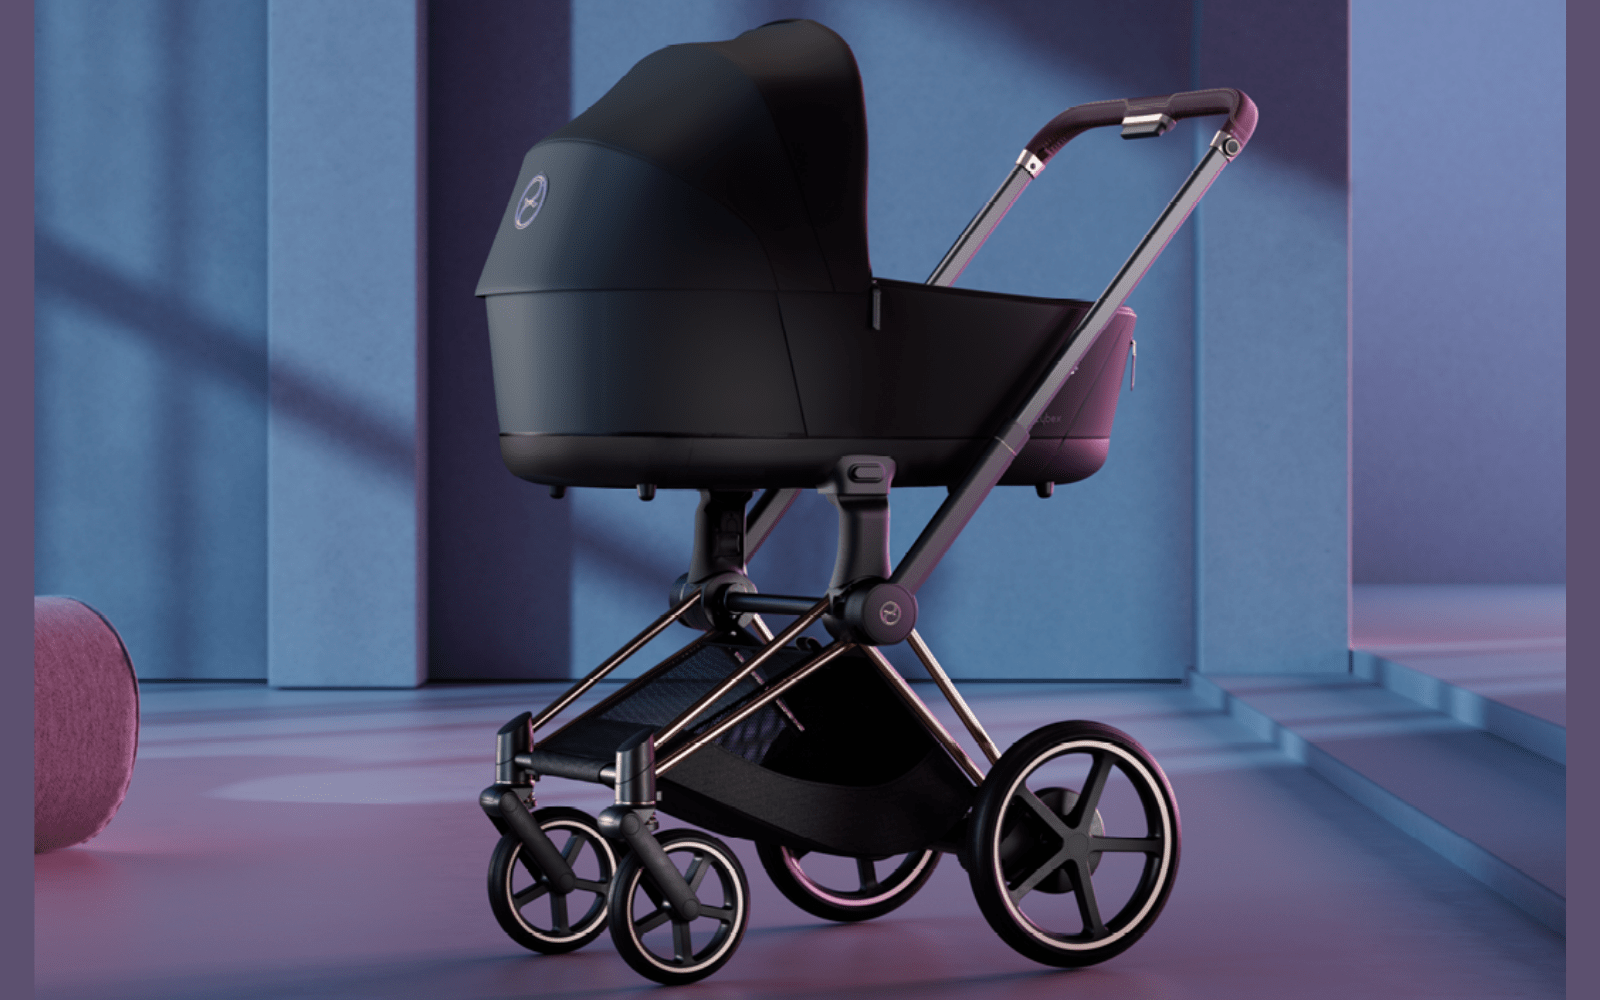 Cybex Strollers, Accessories, and Baby Gear